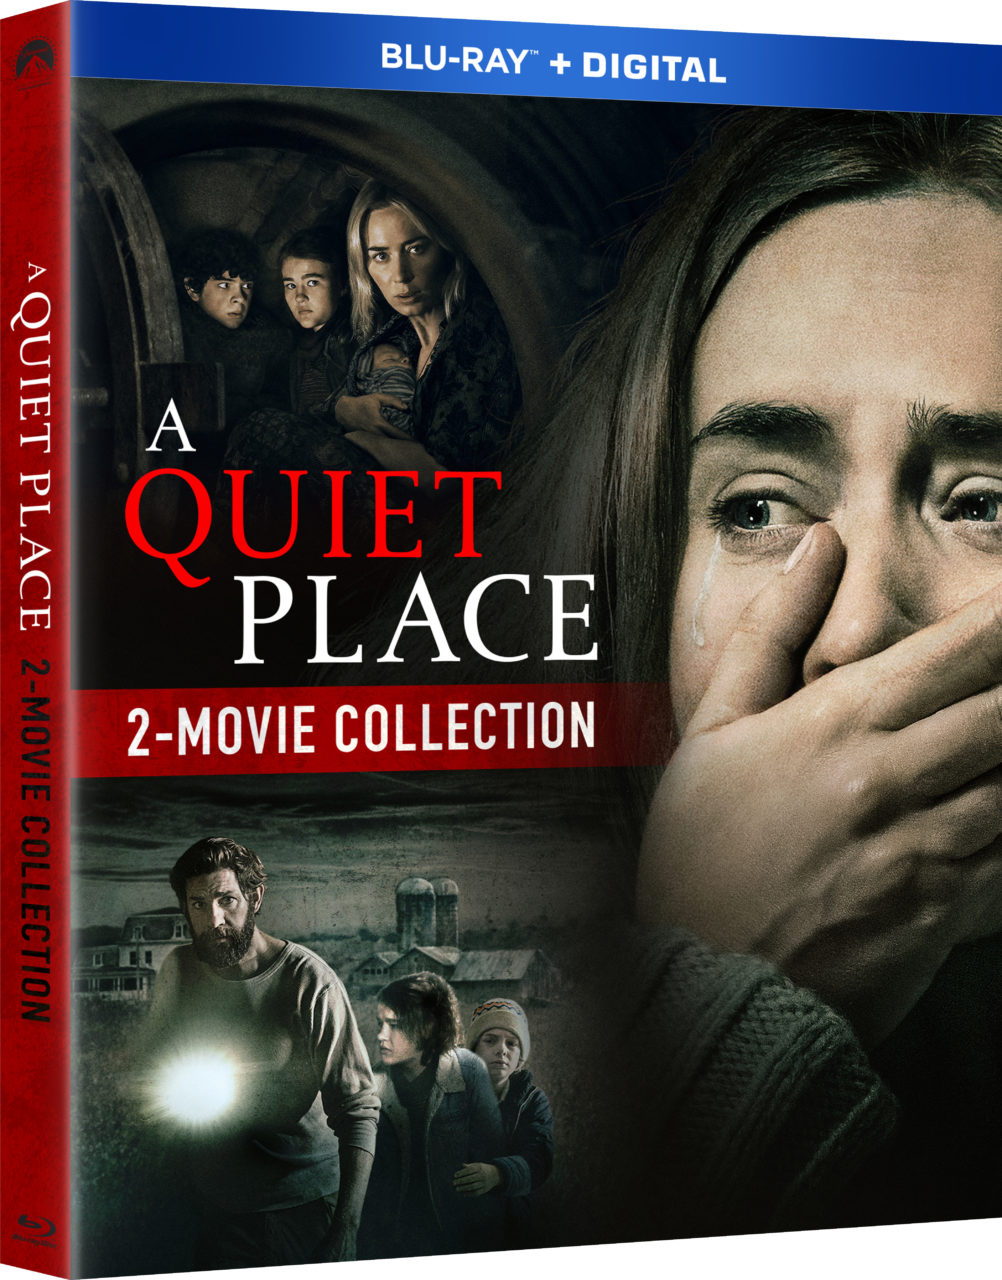 A Quiet Place 2-Movie Collection Blu-Ray Combo Pack cover (Paramount Home Entertainment)